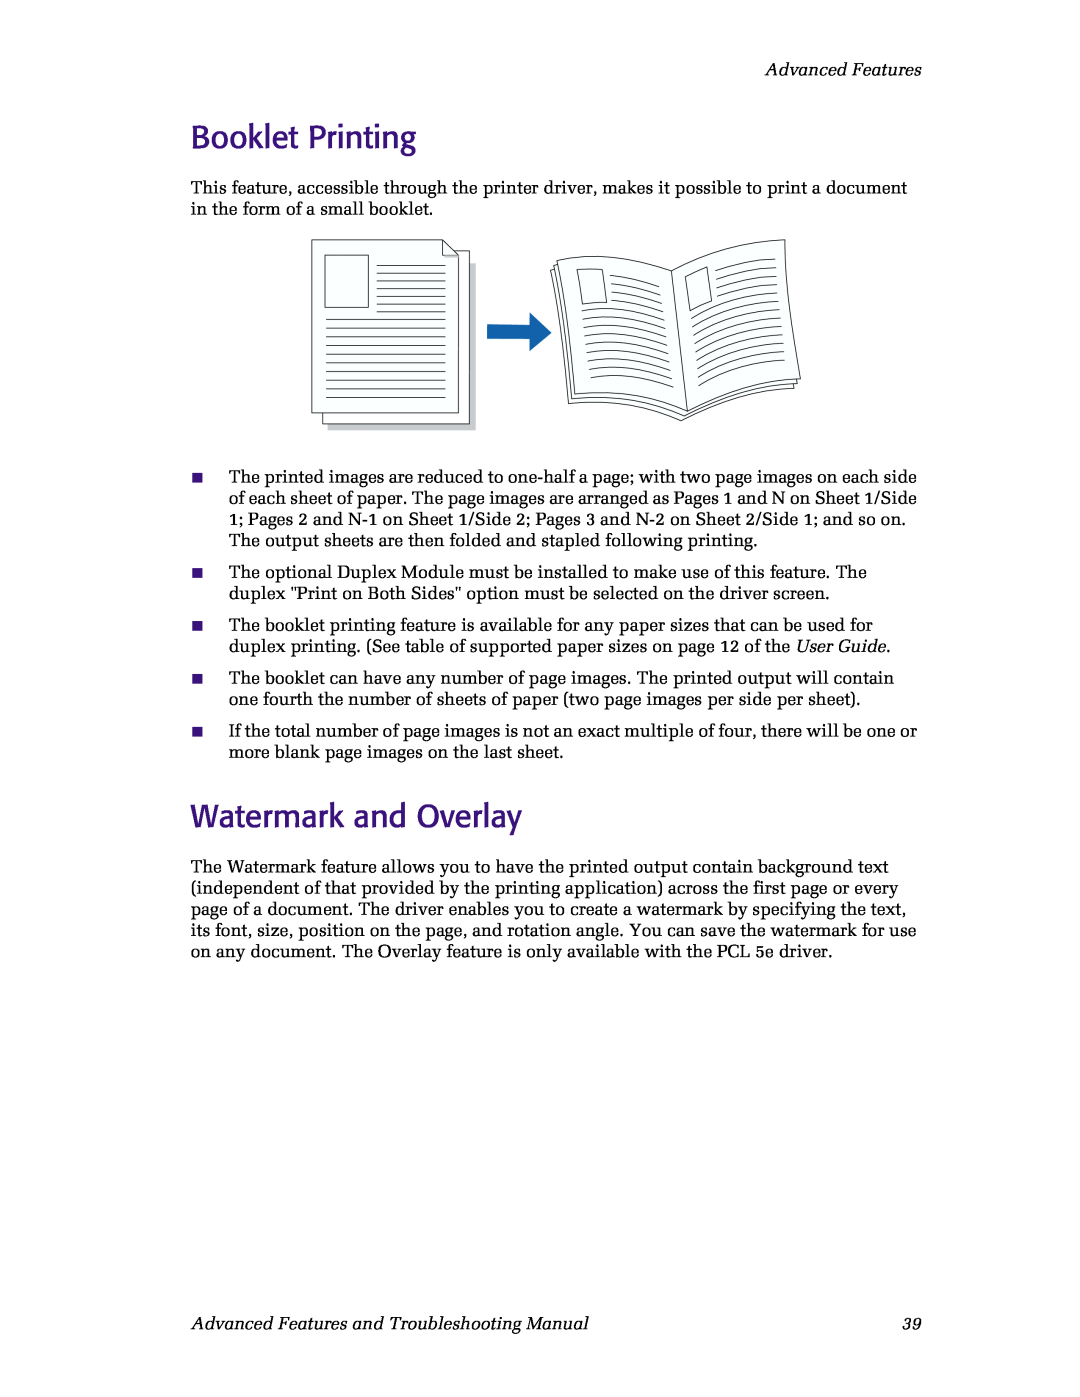 Xerox N4525 manual Booklet Printing, Watermark and Overlay, Advanced Features and Troubleshooting Manual 